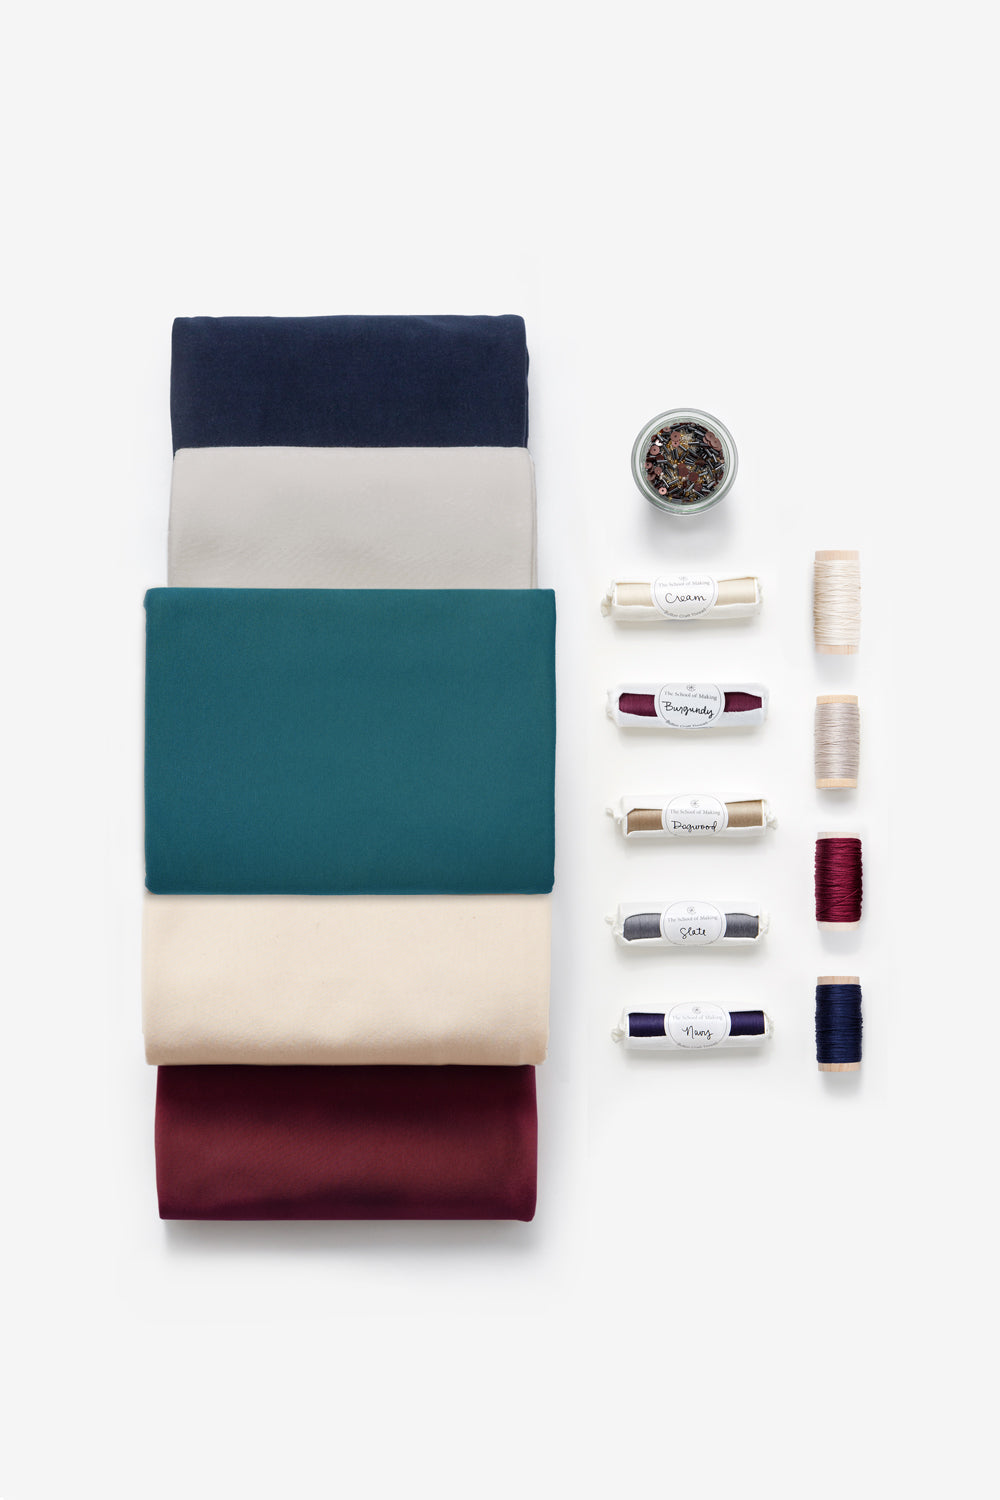 Studio Bundle with Teal, Sand, Beige, Navy, and Plum fabric, plus beads, thread, and floss.